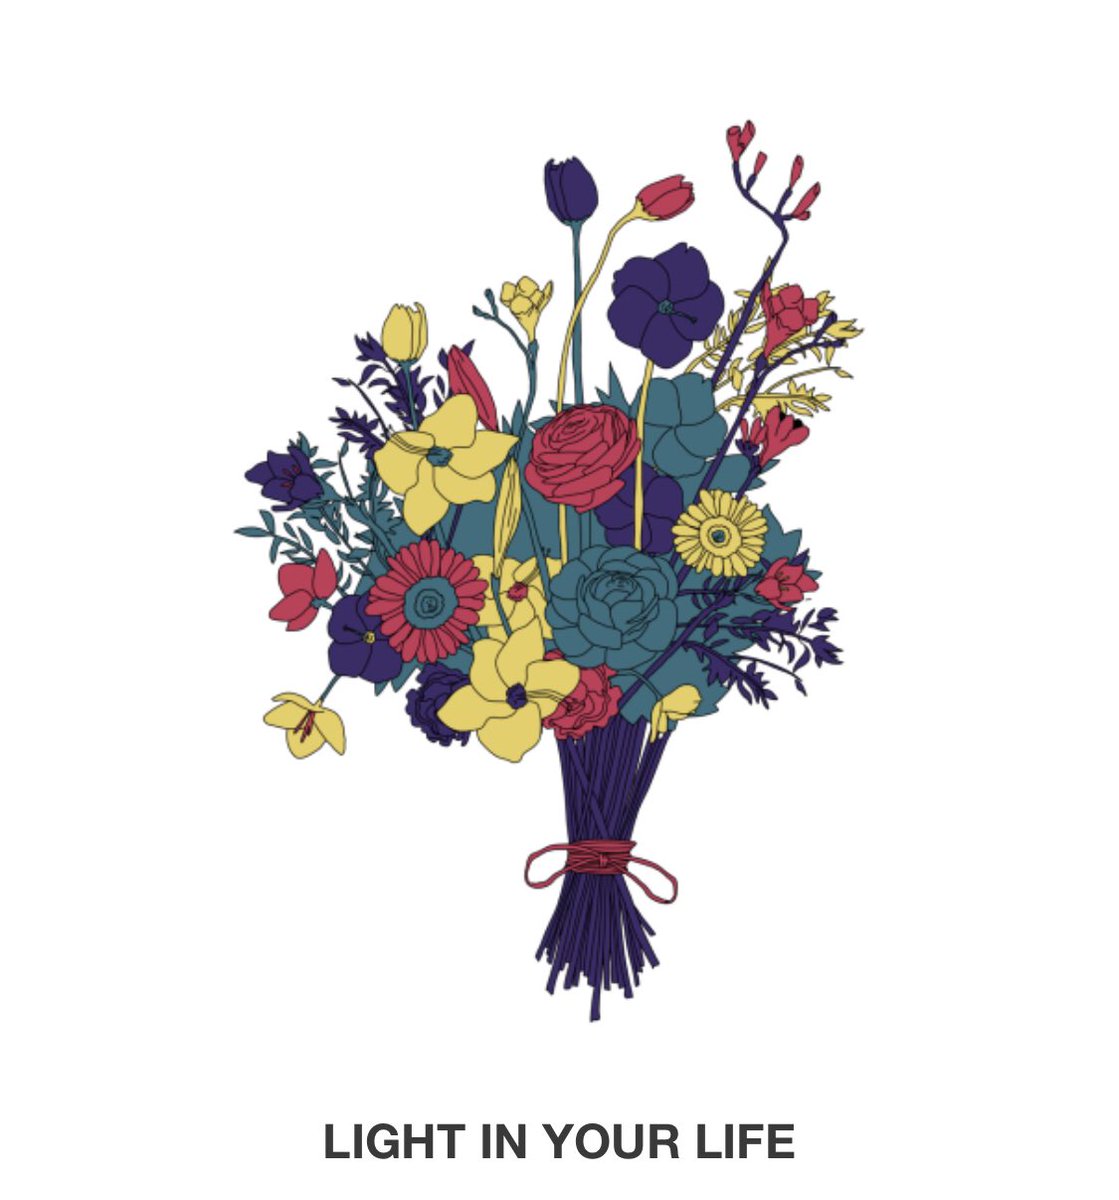 Bouquet: Light In Your LifeSong represents: TBALyric: “A little something to let you know that our love has no question mark”Nothing about this track has been confirmed or announced yet, but we can know by the lyric is going to be beautiful.